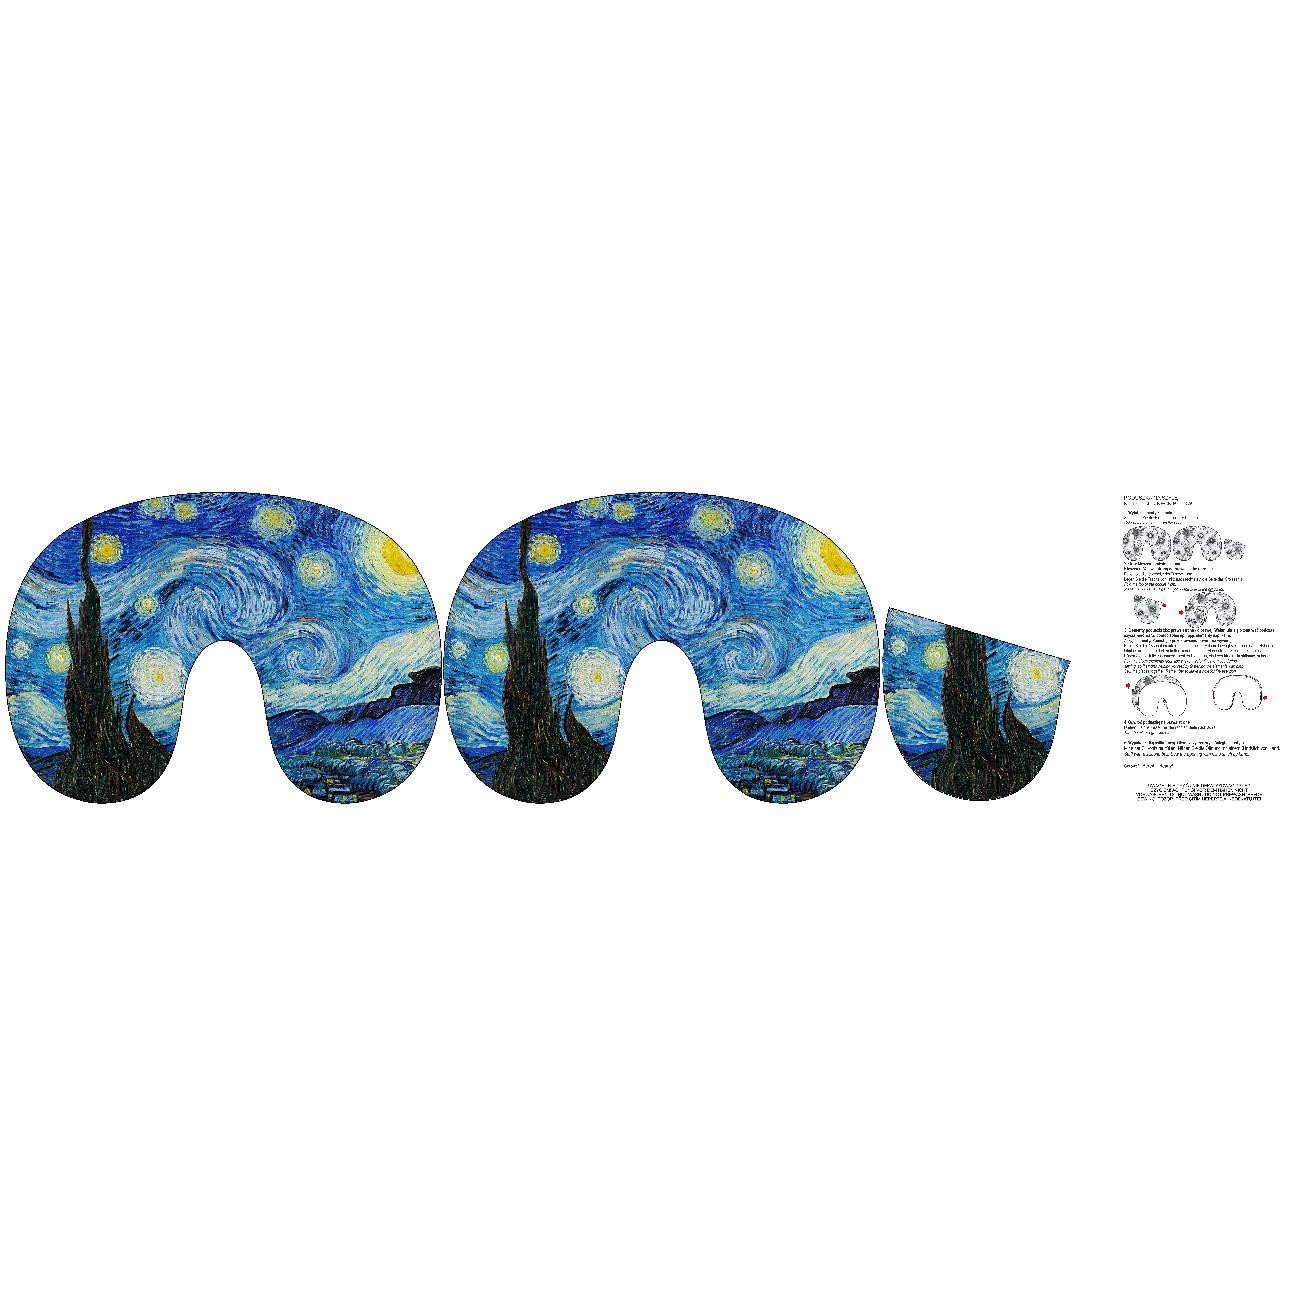 NECK PILLOW - THE STARRY NIGHT (Vincent van Gogh) - sewing set